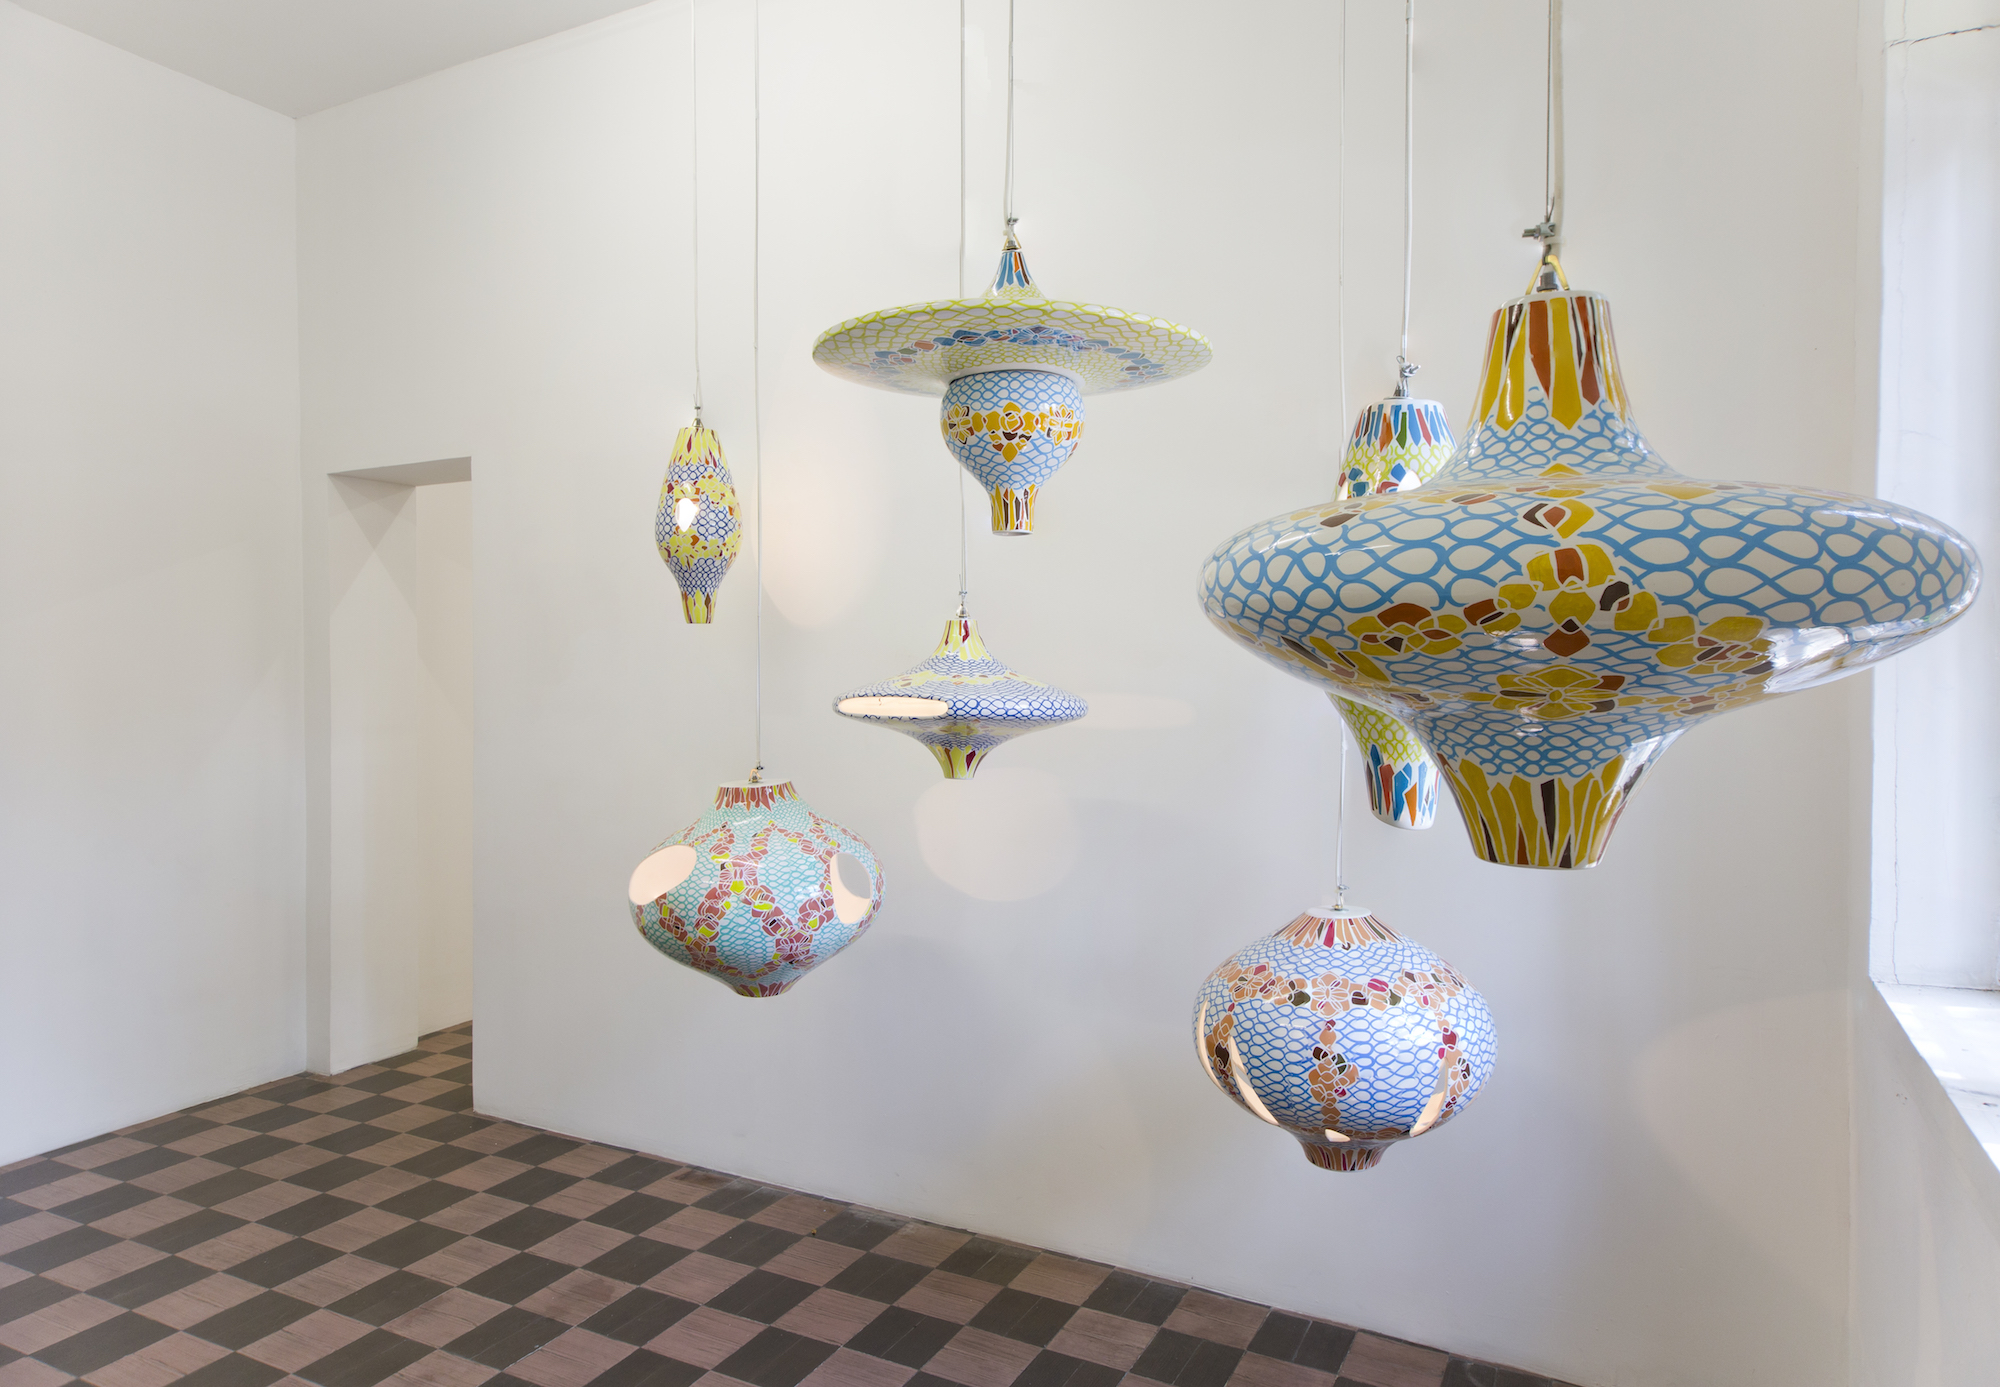 Seven hand-painted ceramic light fixtures, dimensions variable are part of this artwork by Jorge Pardo